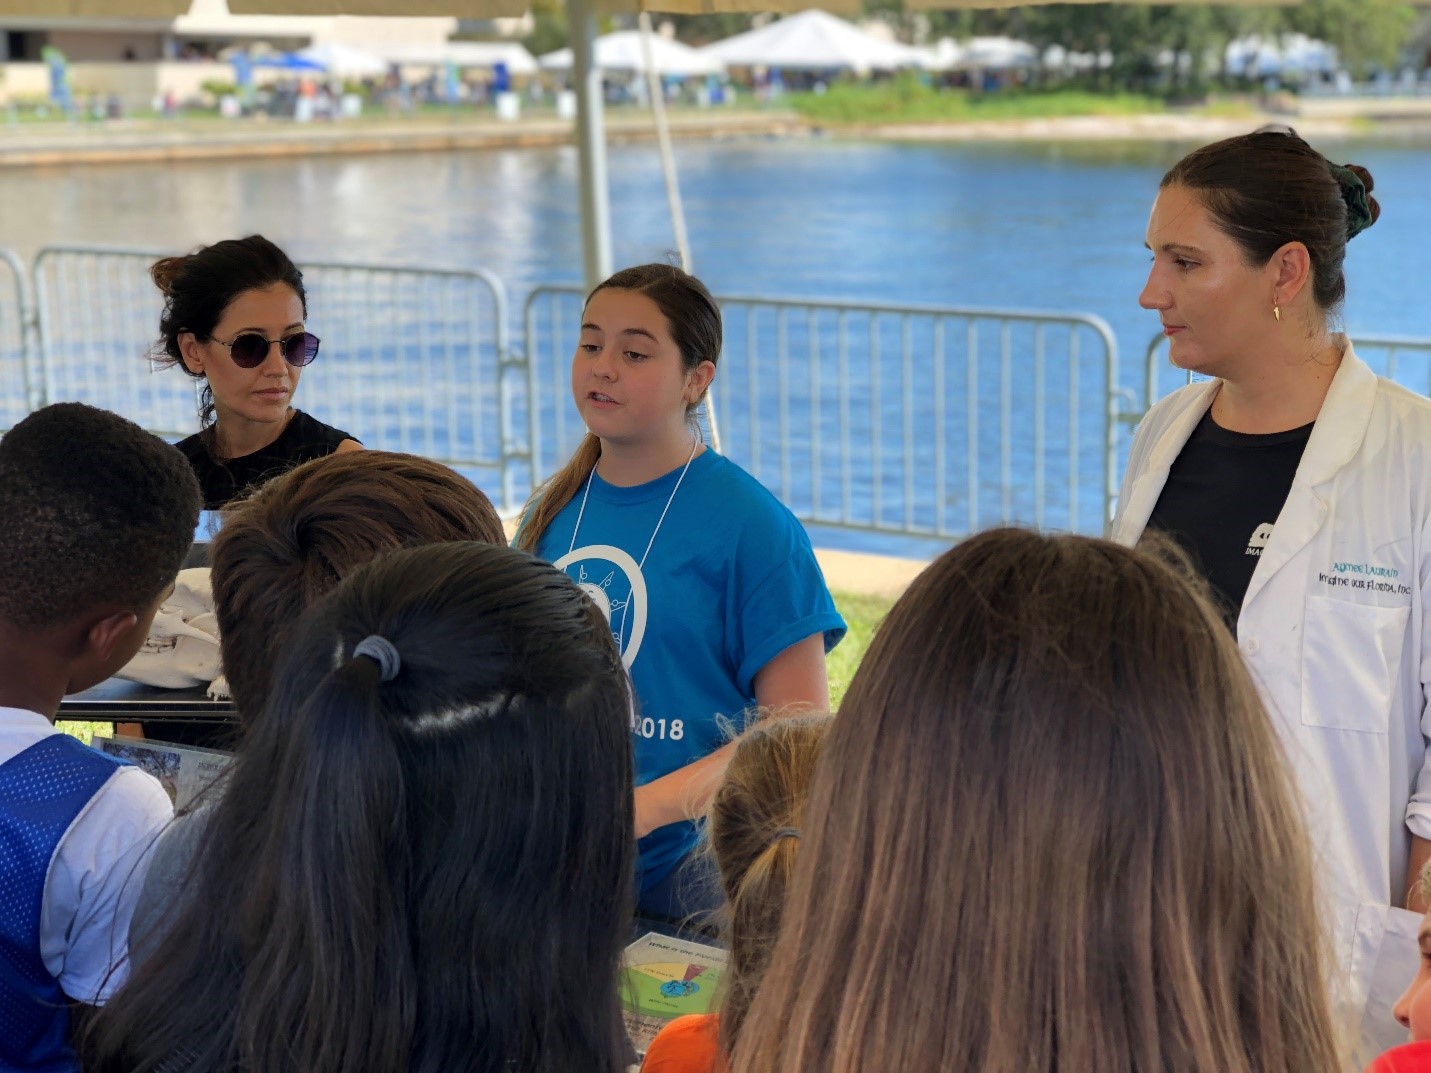 A Junior Scientist explains the diet of Florida black bears at the Imagine Our Florida, Inc. booth during the 2018 St. Petersburg Science Festival. 